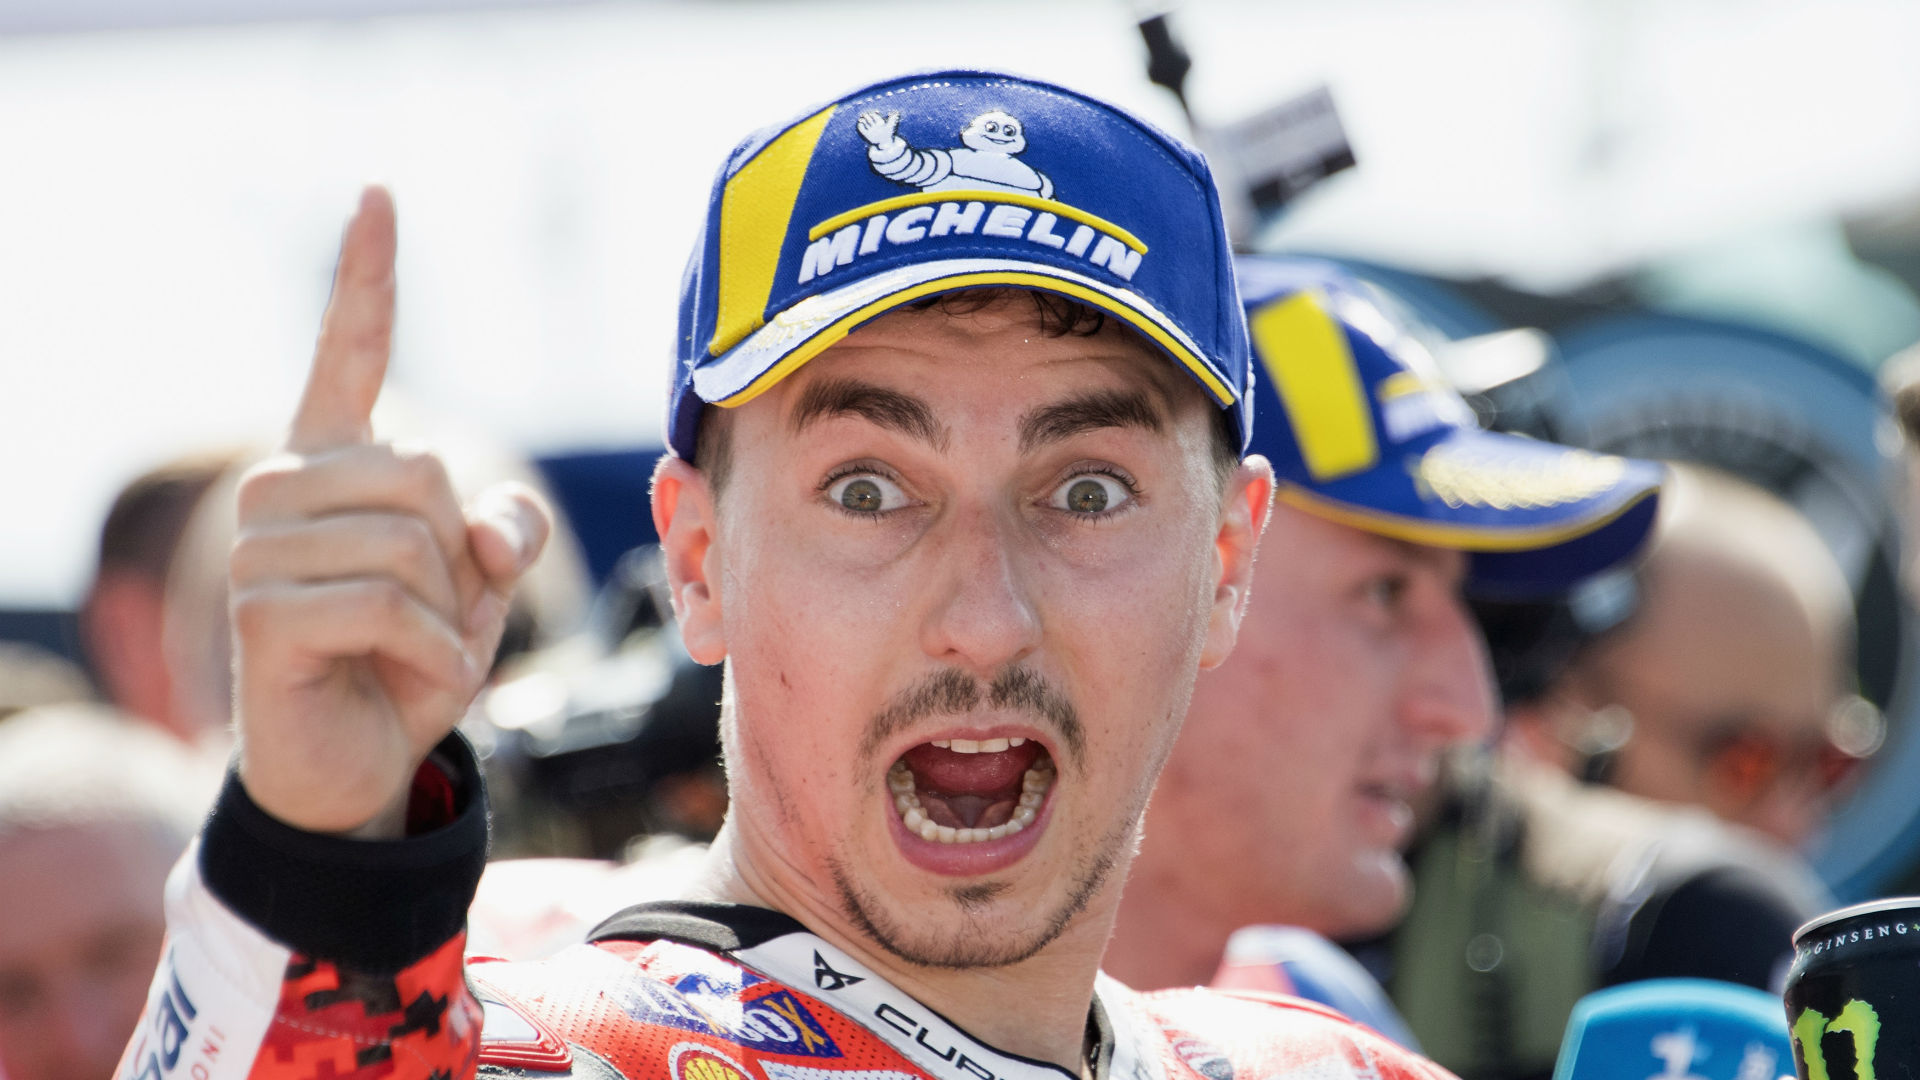 Take a look at the numbers behind Jorge Lorenzo's decorated MotoGP career after he confirmed his upcoming retirement.